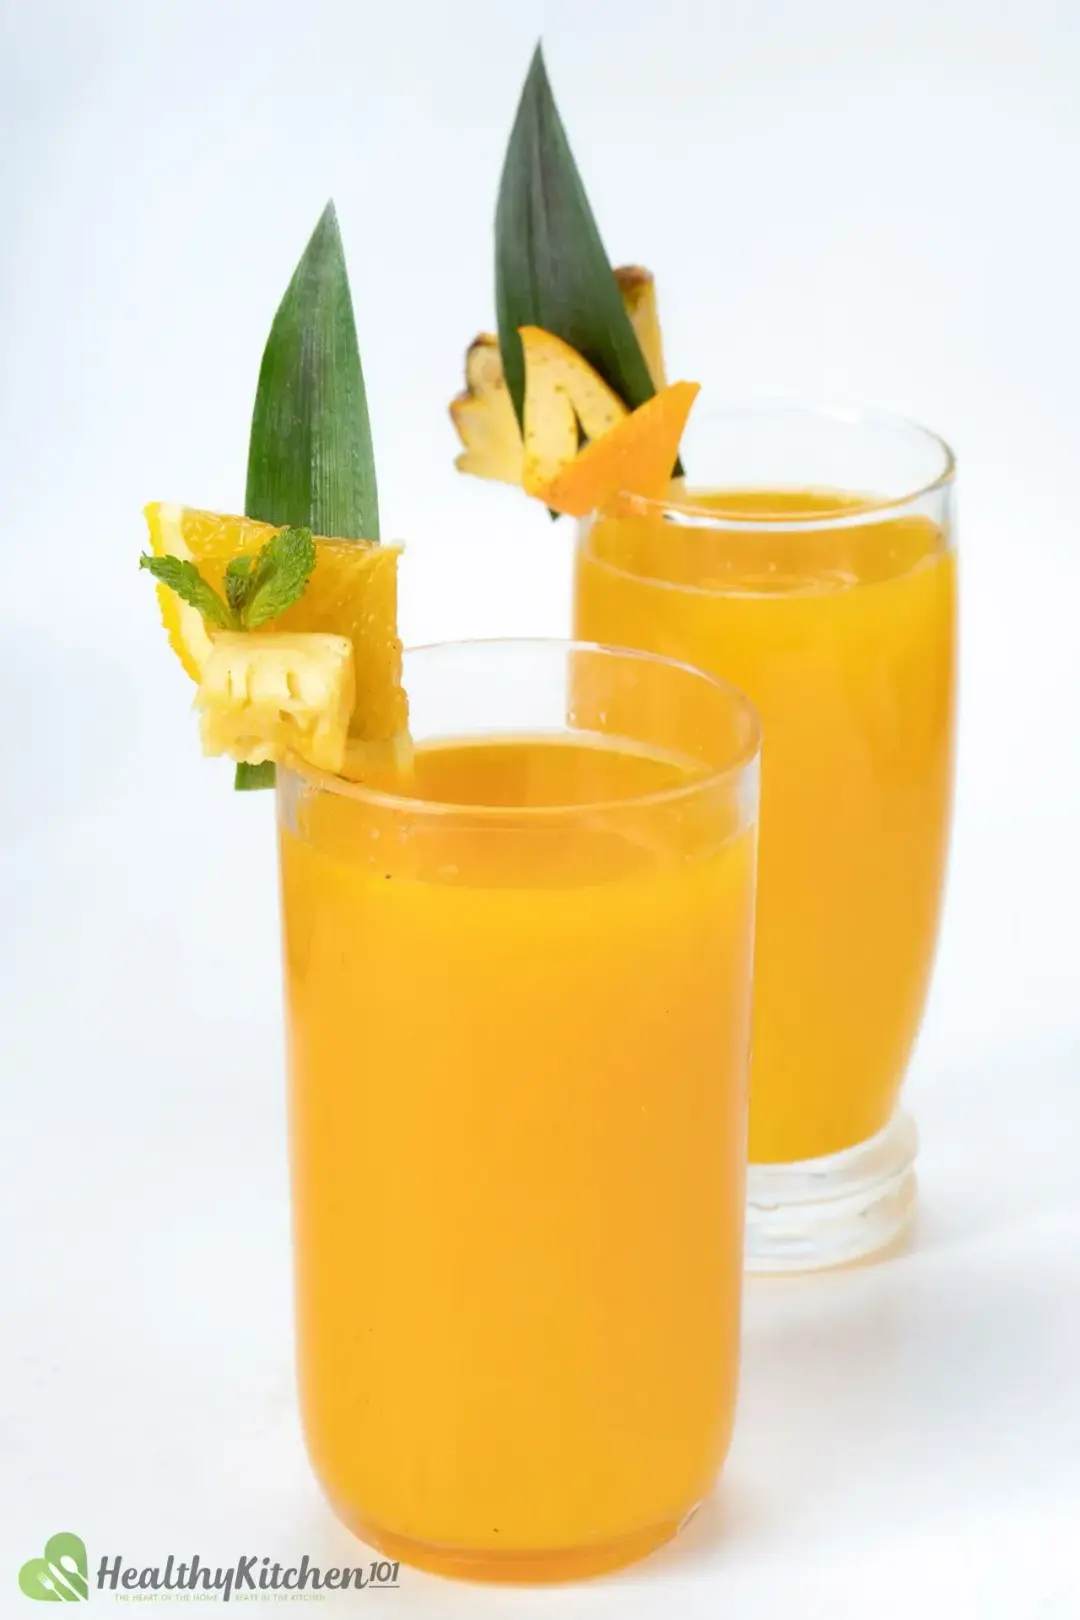 Two glasses of orange pineapple drinks garnished with a piece of pineapple leaf, orange, and pineapple